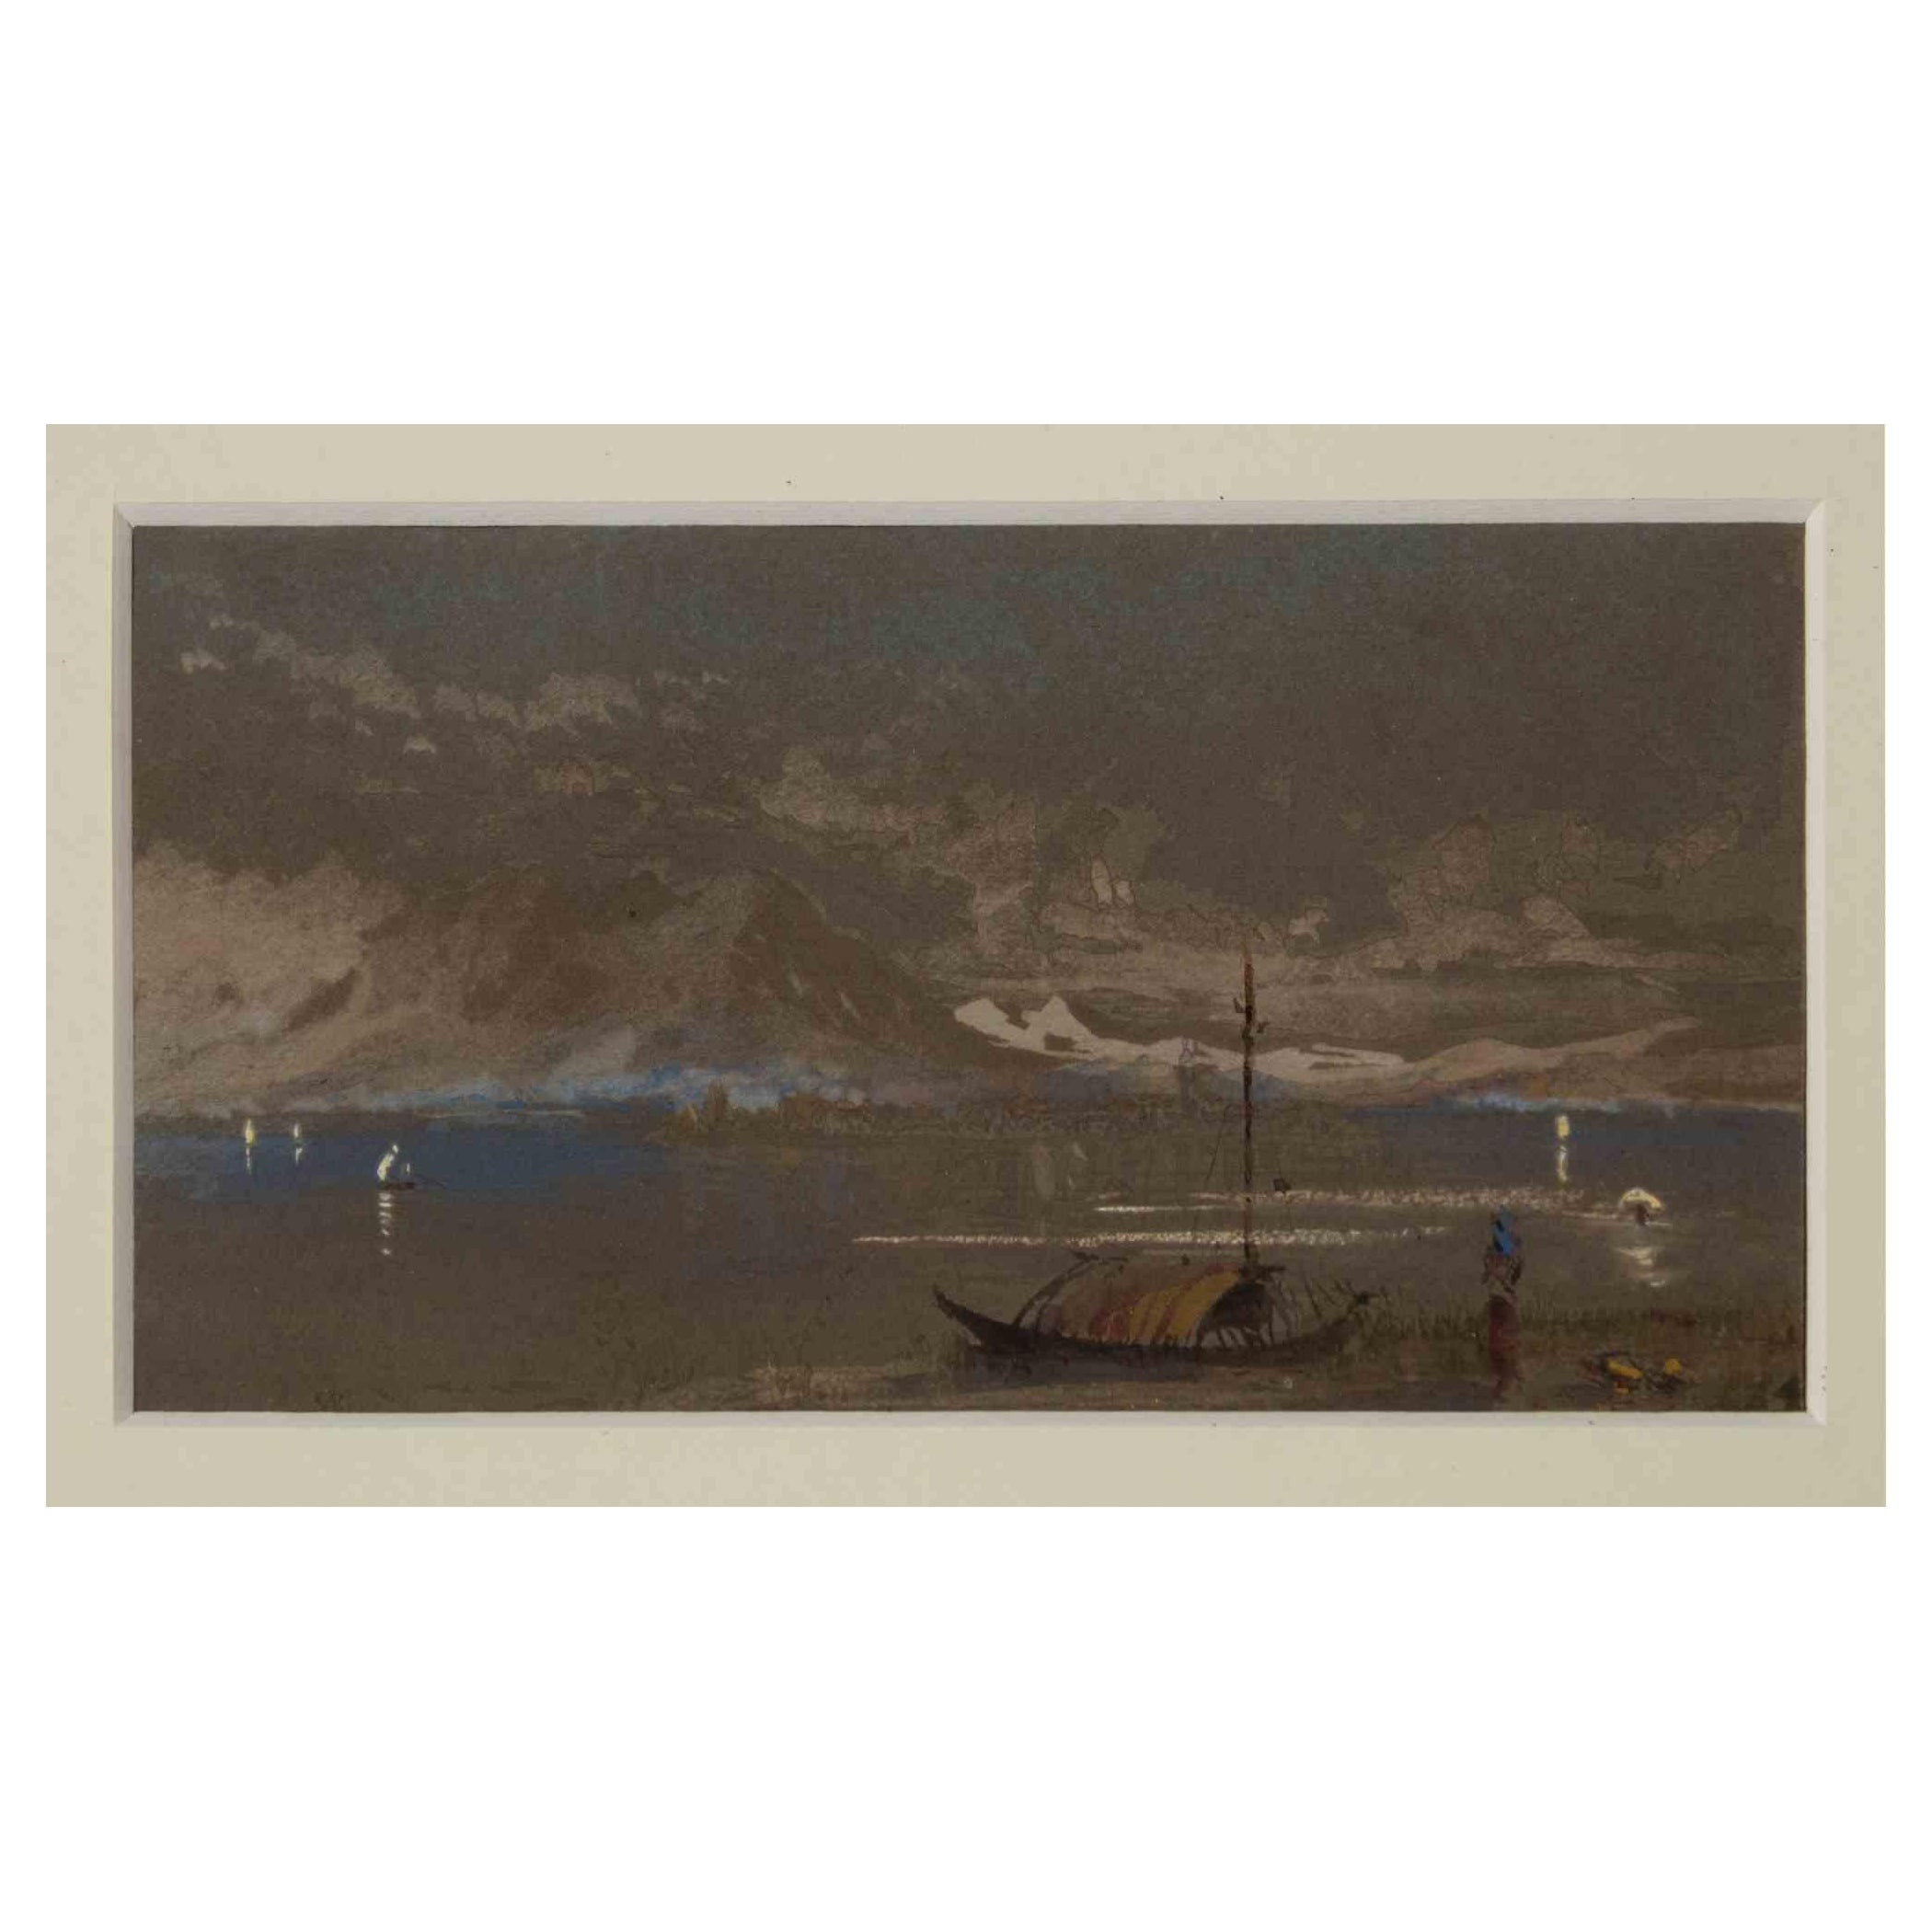 The River  is an original artwork realized in the end of 19th Century by Friedrick Paul Nerly.

Mixed colored ink and watercolor.

The artwork is hand signed on the lower left margin.

The watercolor depict a river.
